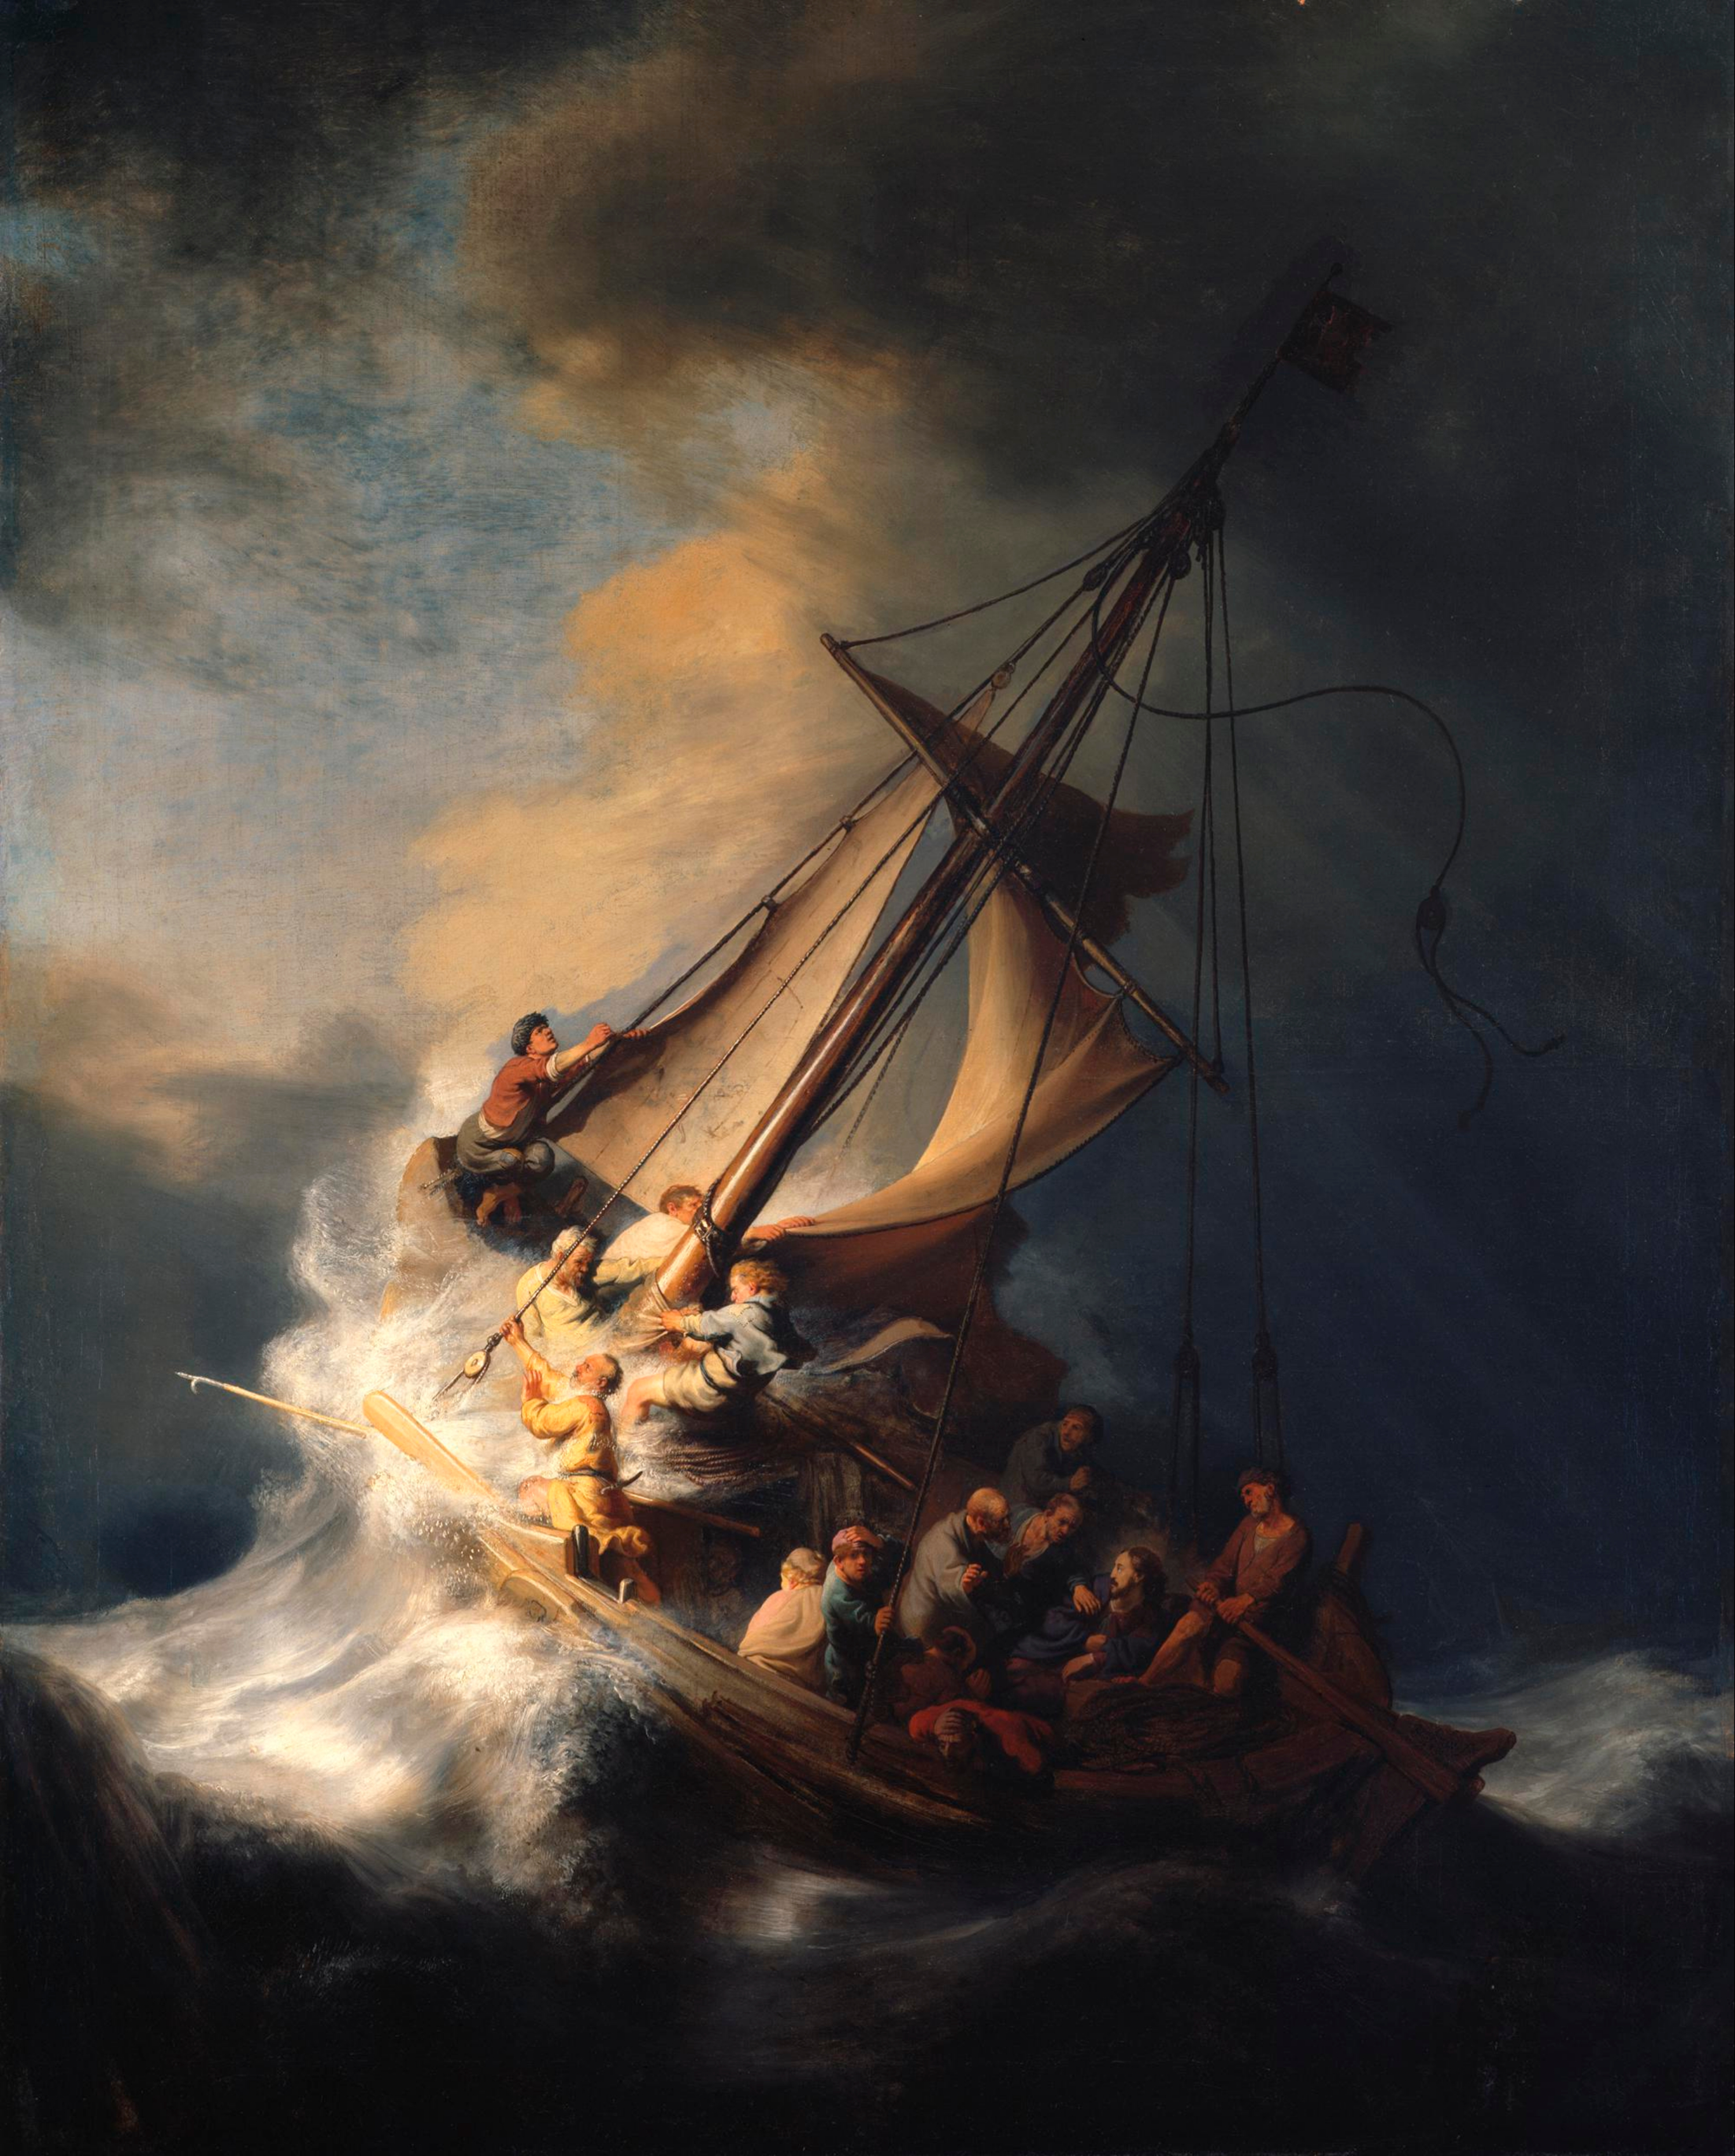 http://upload.wikimedia.org/wikipedia/commons/f/f3/Rembrandt_Christ_in_the_Storm_on_the_Lake_of_Galilee.jpg